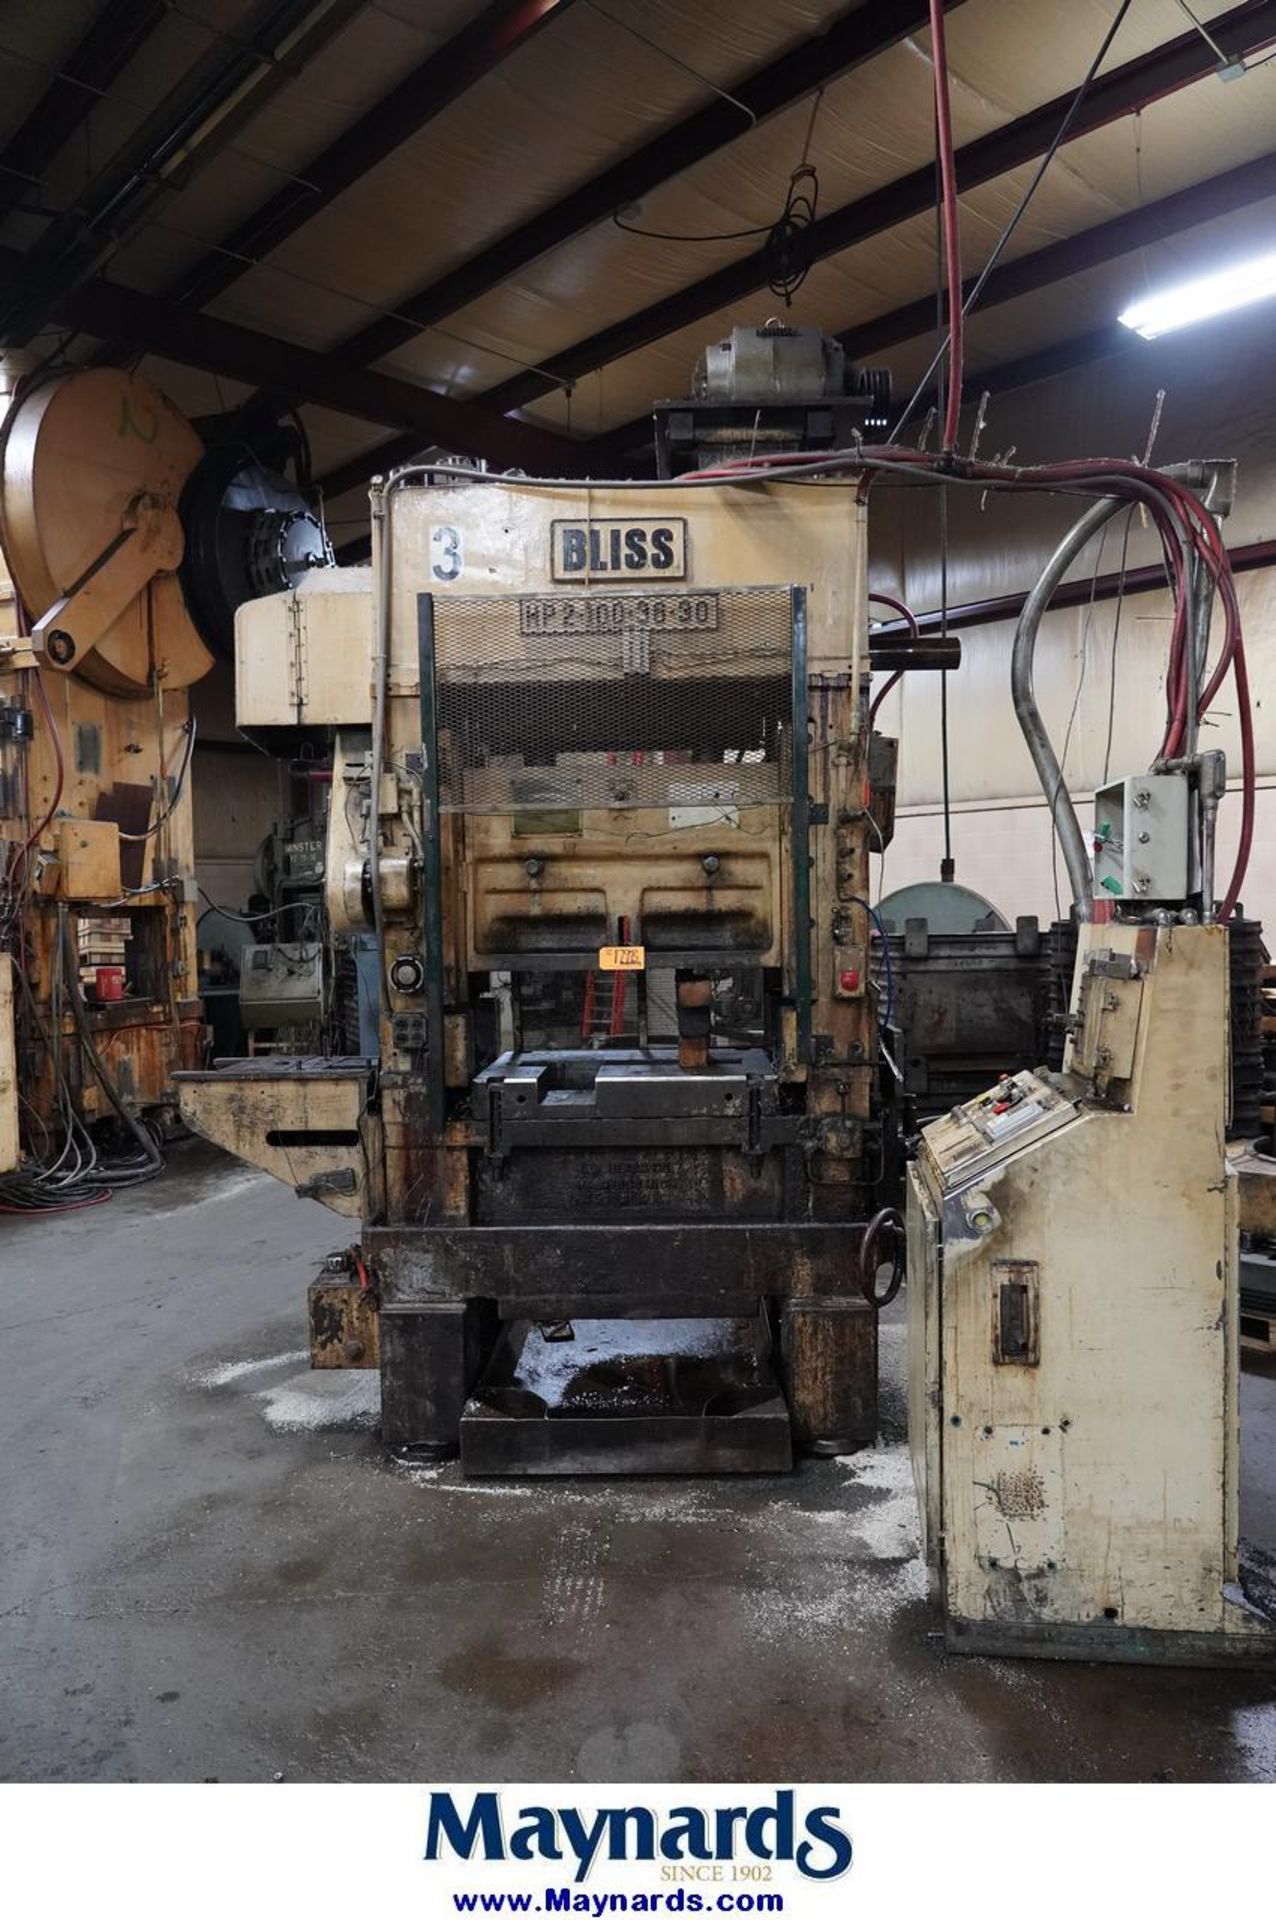 Bliss HP2-100-48-30 100 Ton Stamping Press - Image 2 of 12